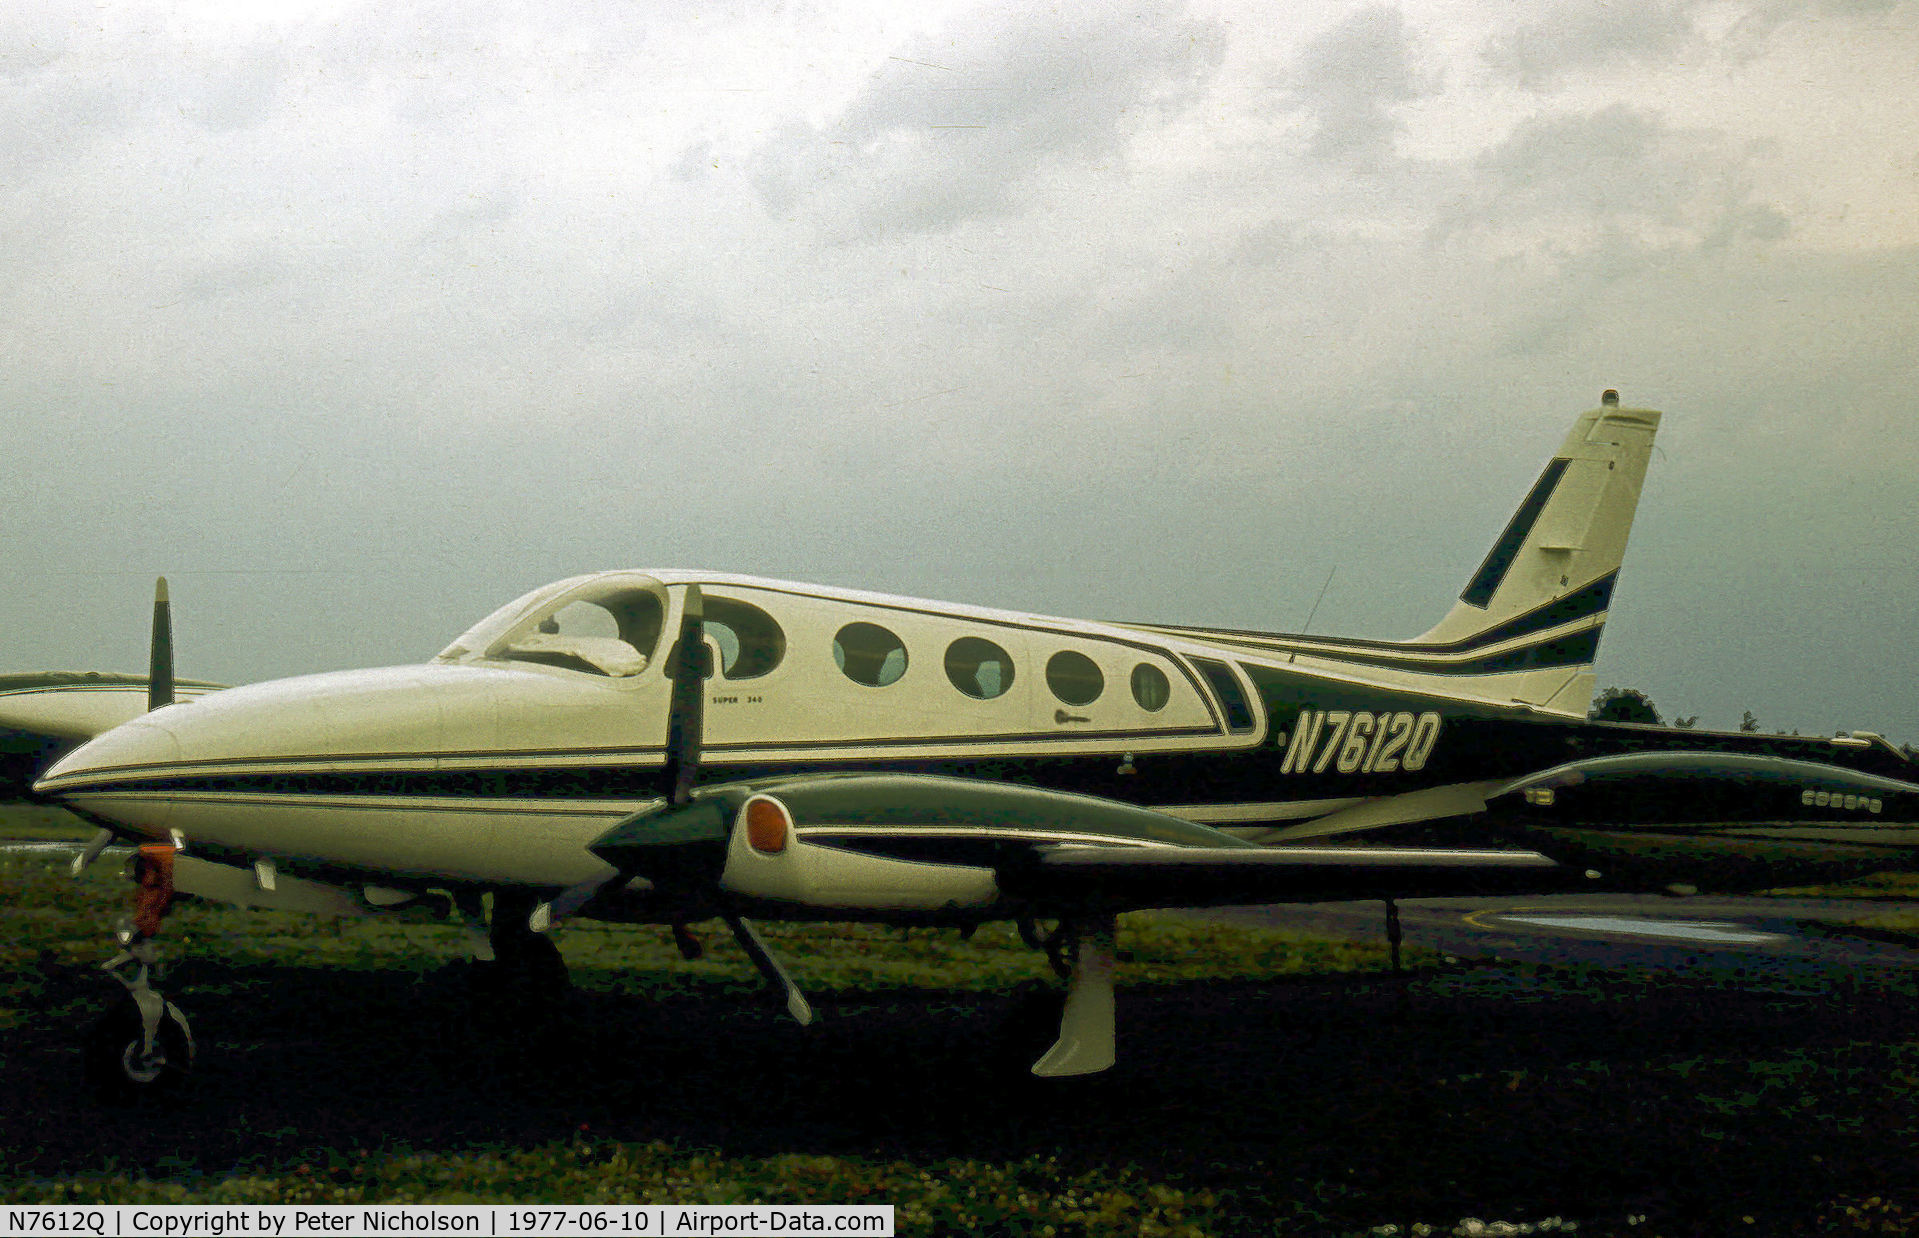 N7612Q, 1973 Cessna 340 C/N 340-0233, This Riley Super 340 was seen at Spring Valley Airport in New York State in the Summer of 1977.  The airport closed in 1985.